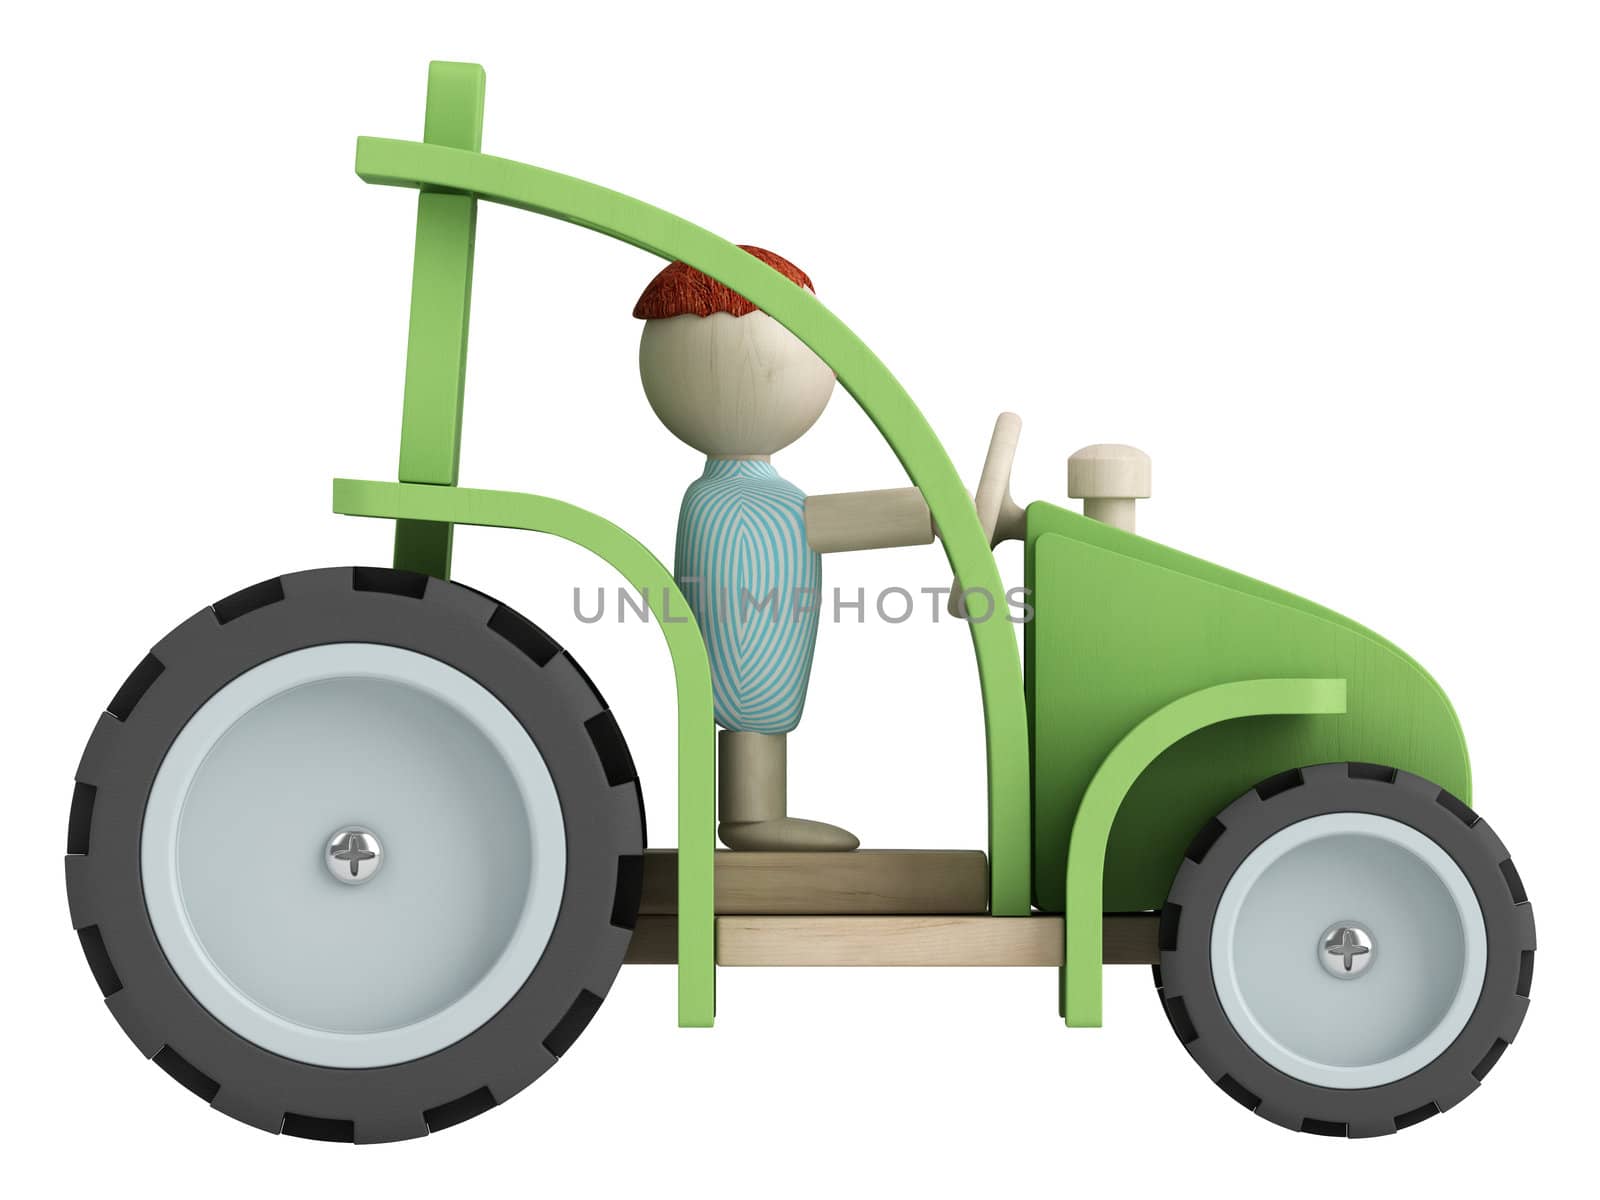 Toy farmer driving his green tractor as he goes about the work on the farm isolated on white